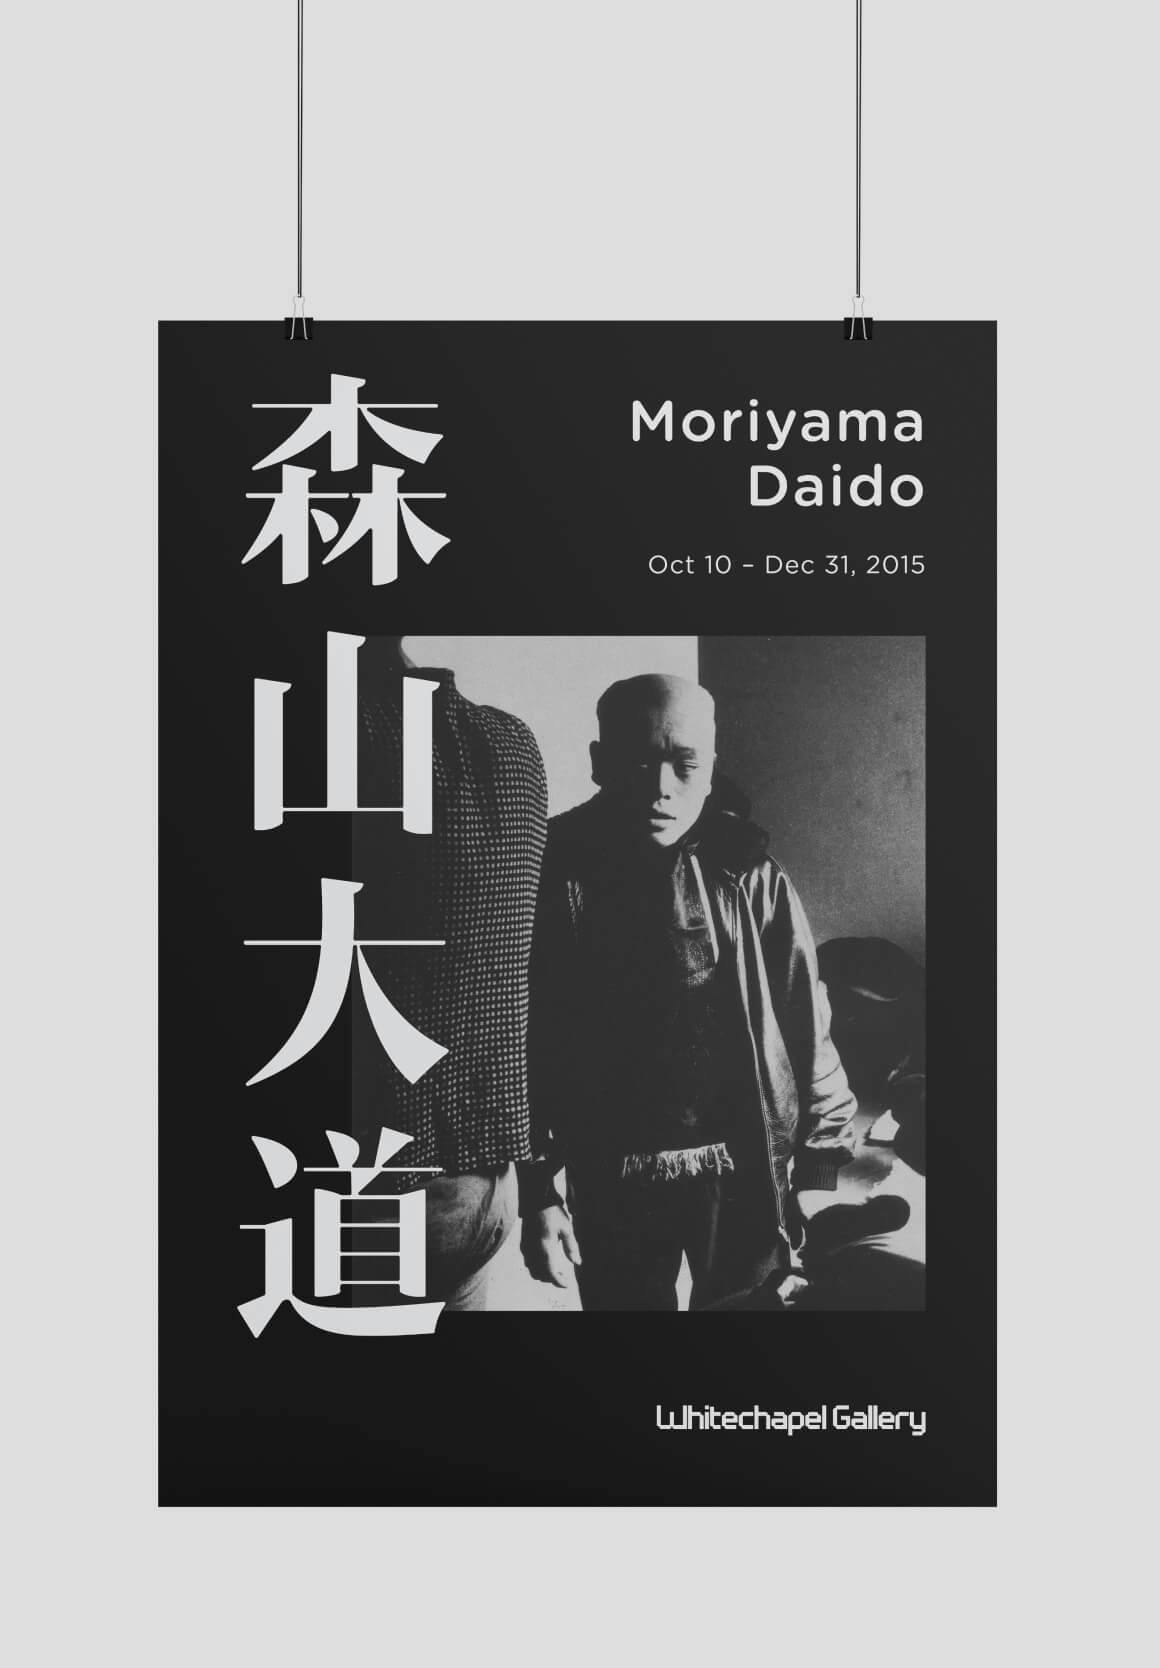 Mockup of a physical art poster. Featured photo in the black-and-white high contrast style of Moriyama Daidos signature photography.